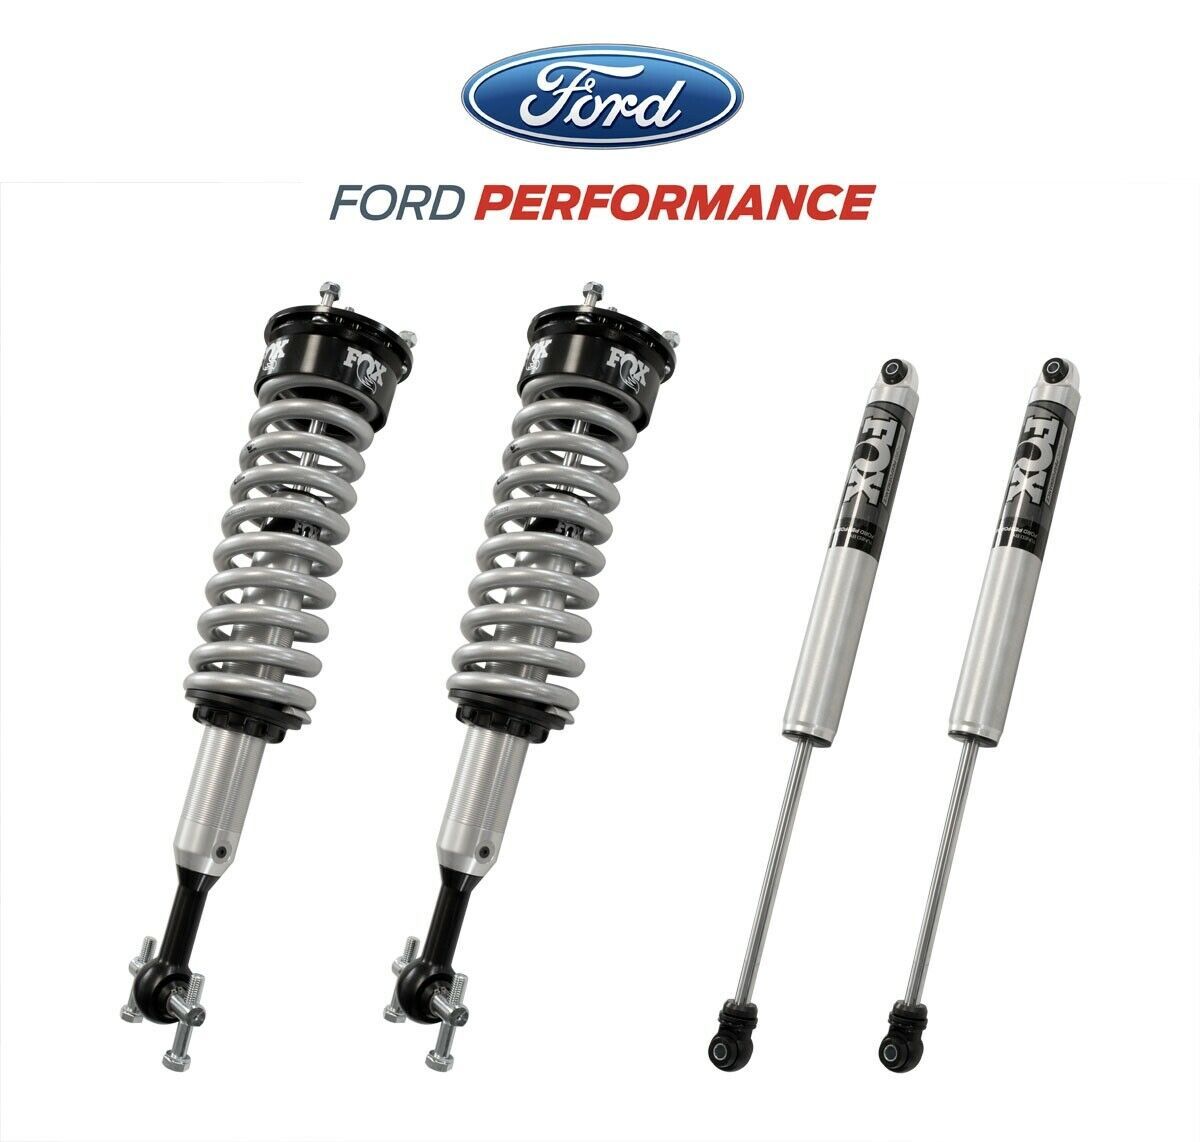 Ford Racing - Ford Performance Off Road Suspension 0-2" Leveling Kit & Shocks For 15-20 F-150 4WD